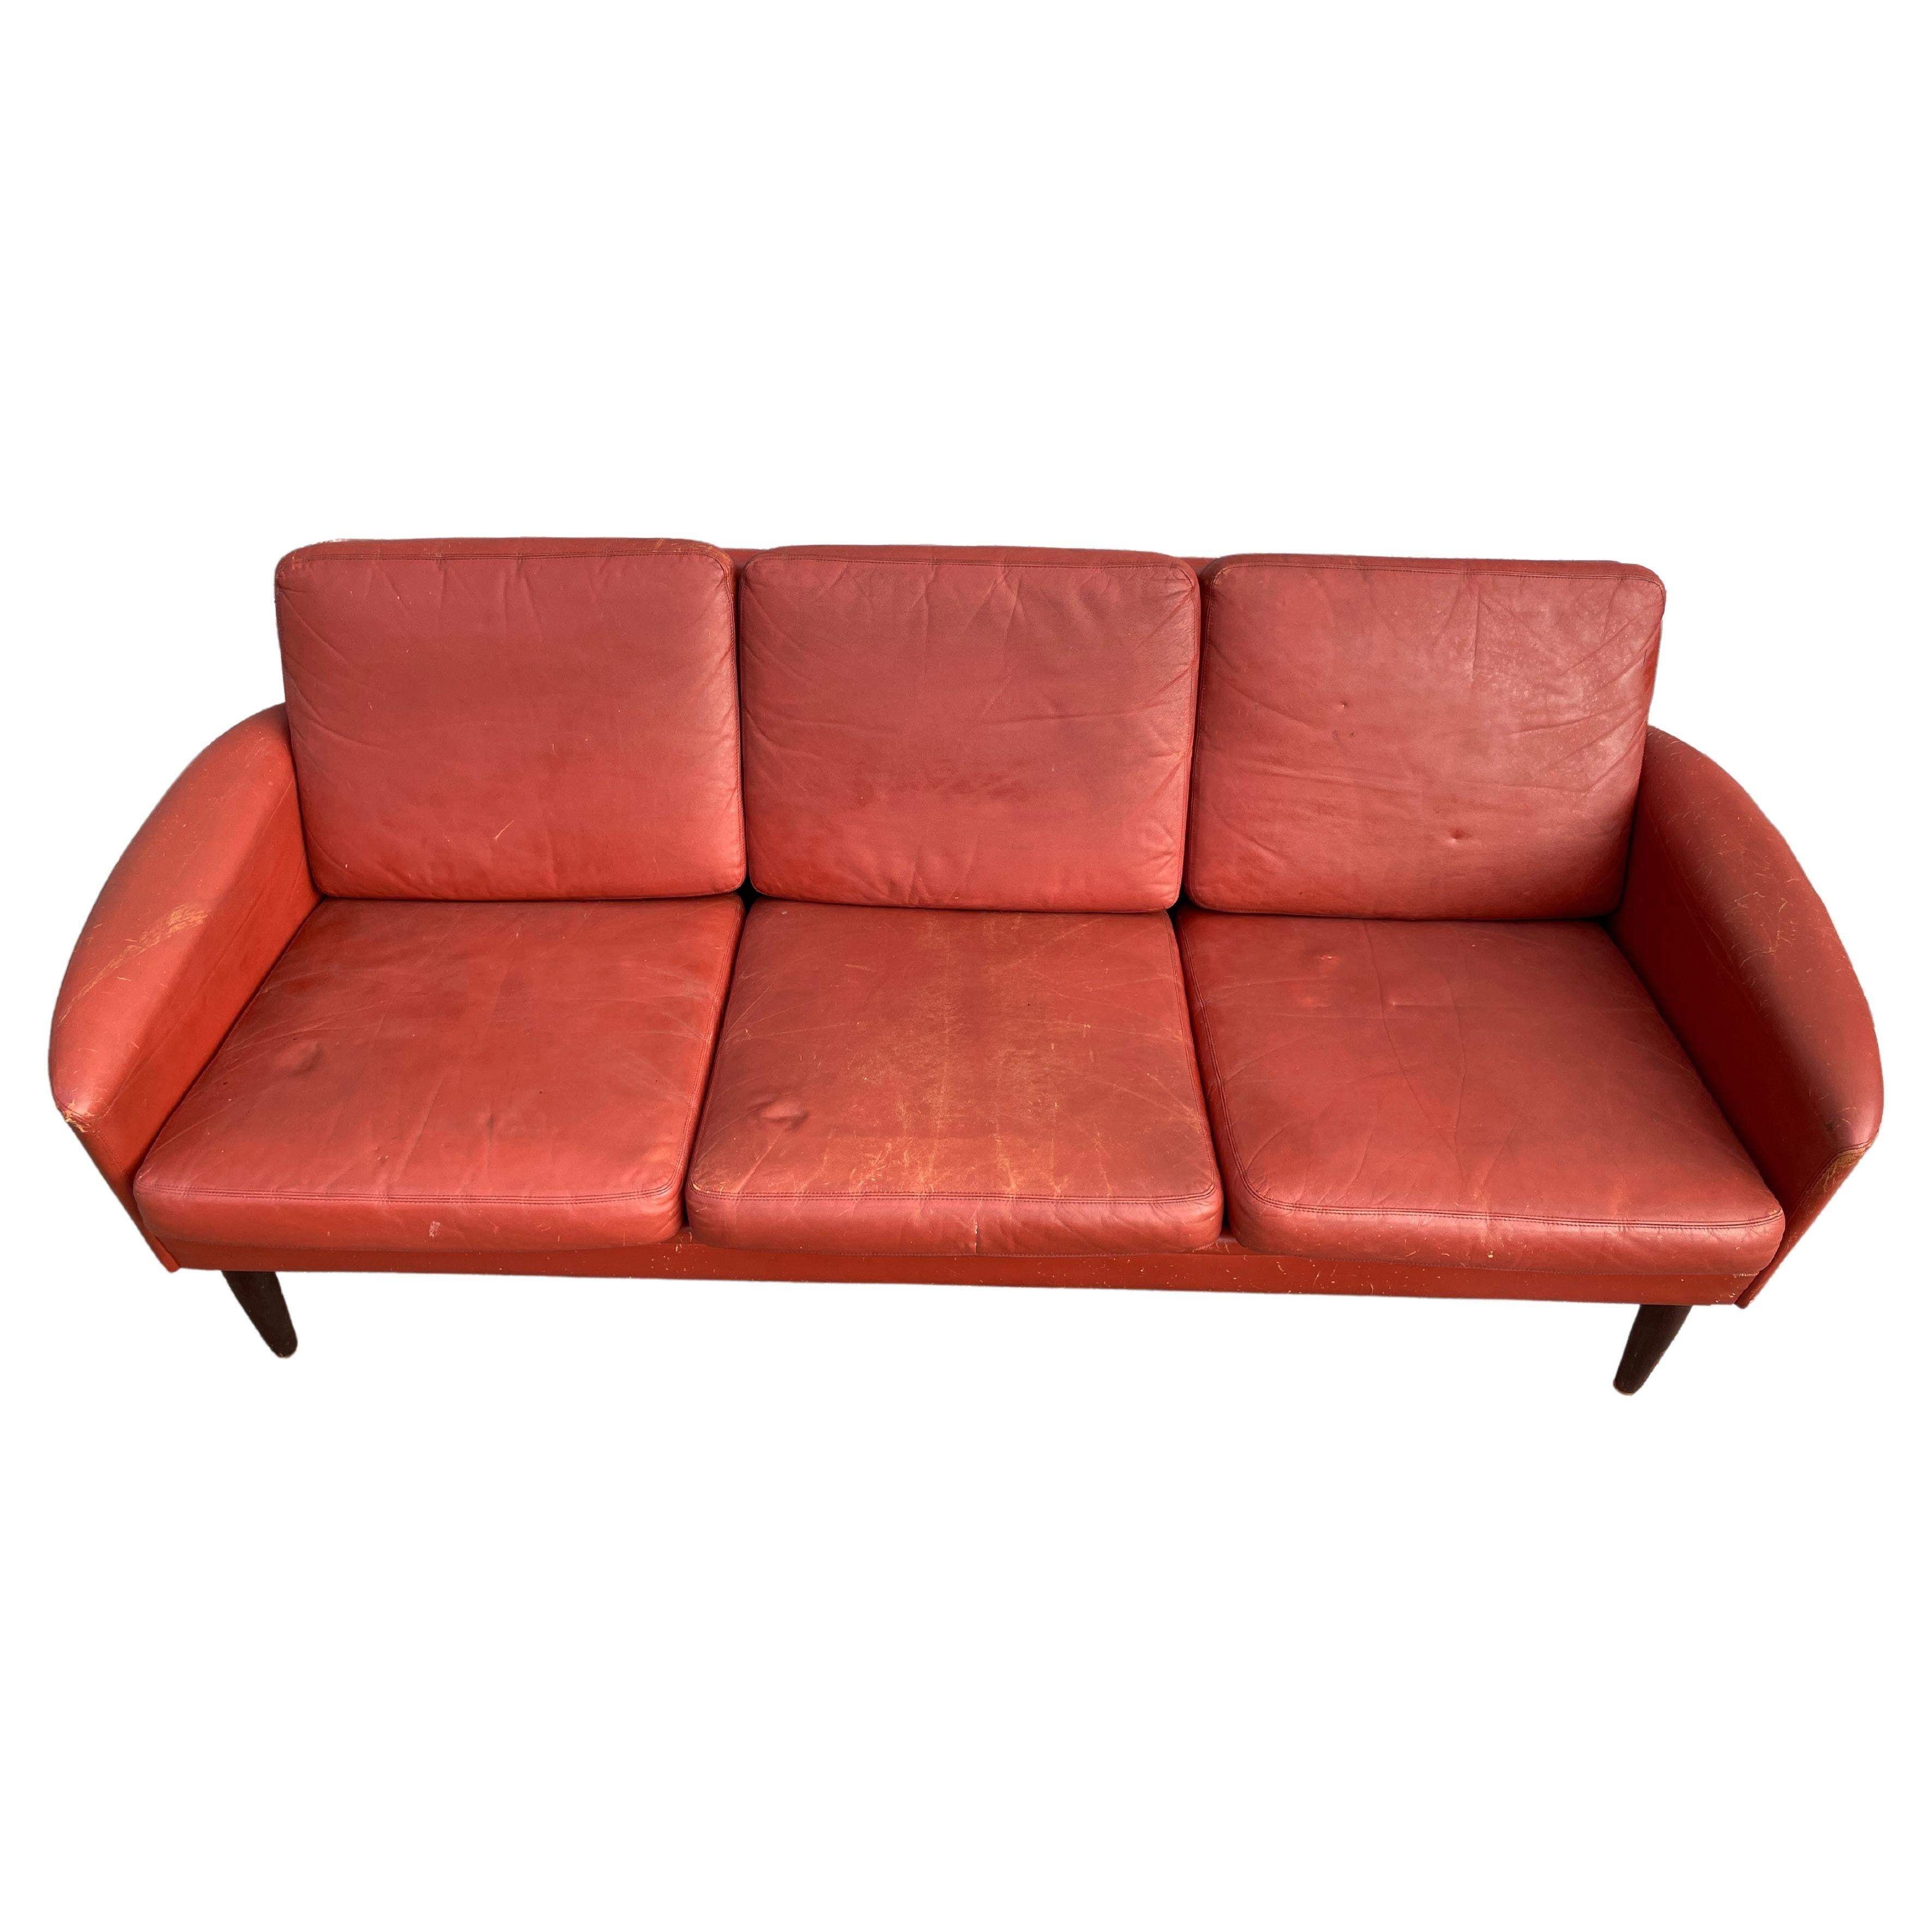 Worn red Leather low 6 foot smaller low 3-seat Danish modern sofa with rosewood legs. Style of Designer Hans Olsen. Amazing patina to original rust red color leather. Original leather worn in with scrapes to corners scuffs marks and cracks all